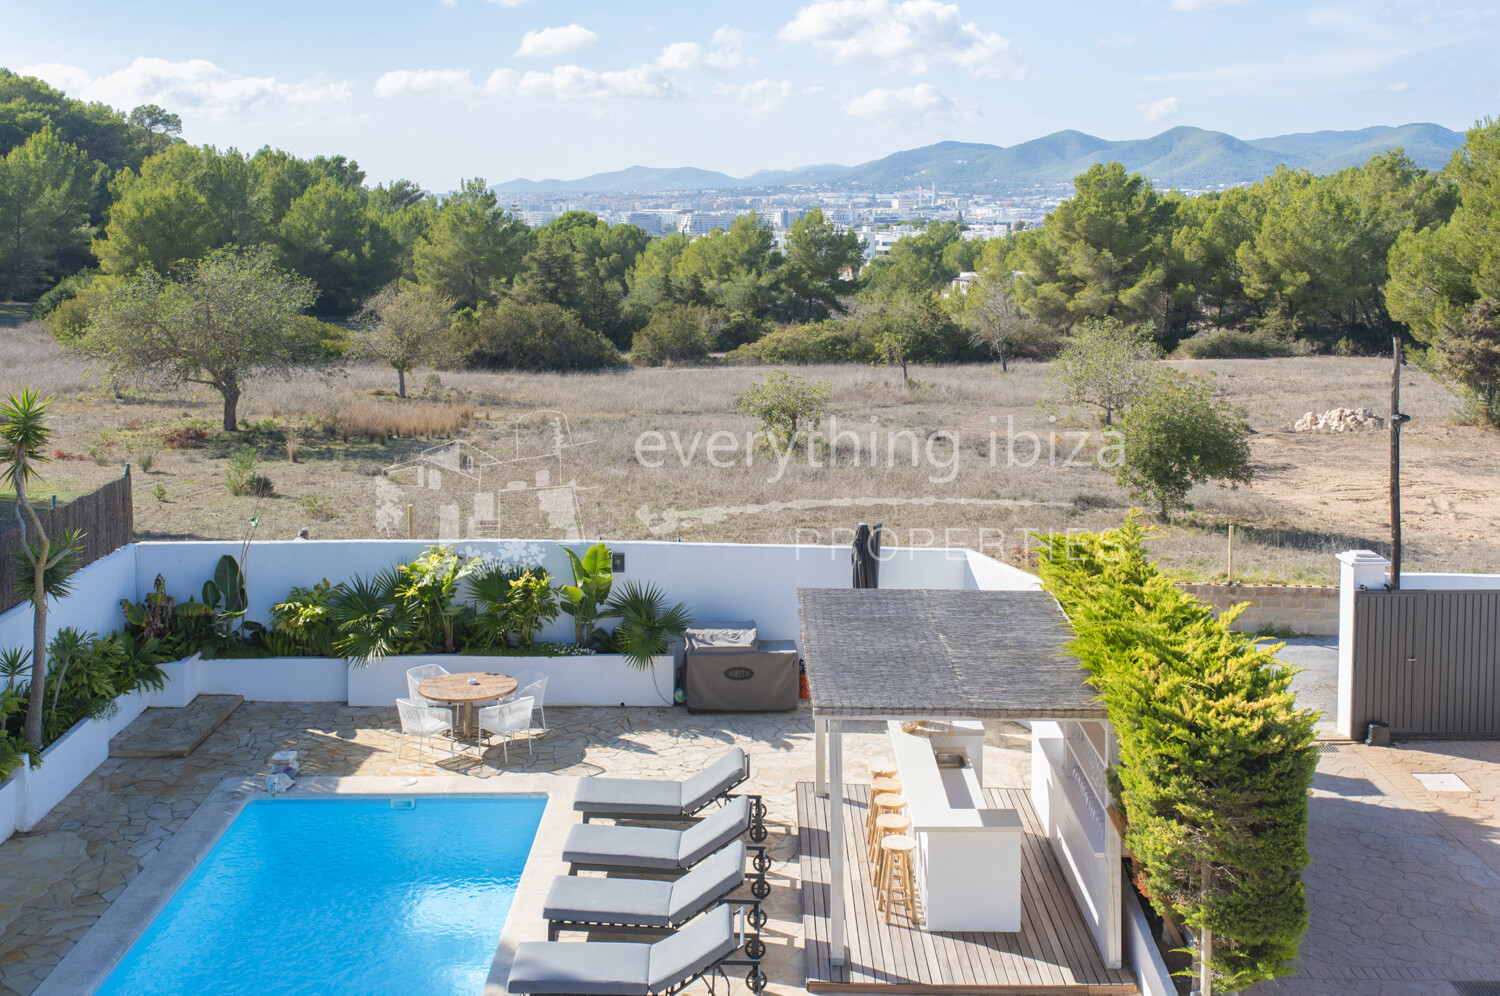 Beautiful Contemporary Villa Close to Cosmopolitan Village of Jesus, ref. 1681, for sale in Ibiza by everything ibiza Properties